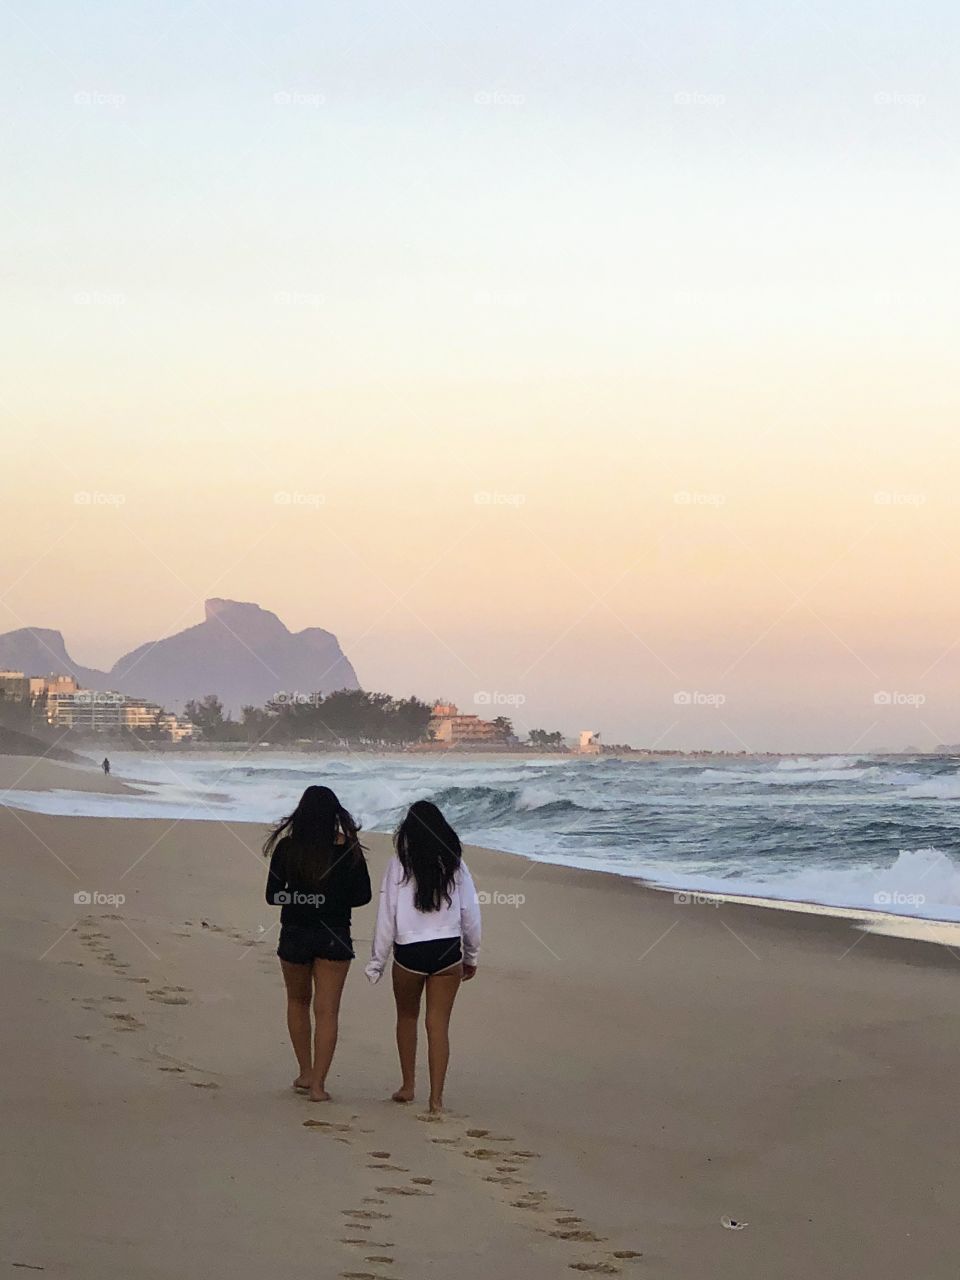 Two girls walking on the beach in a beautiful sunset